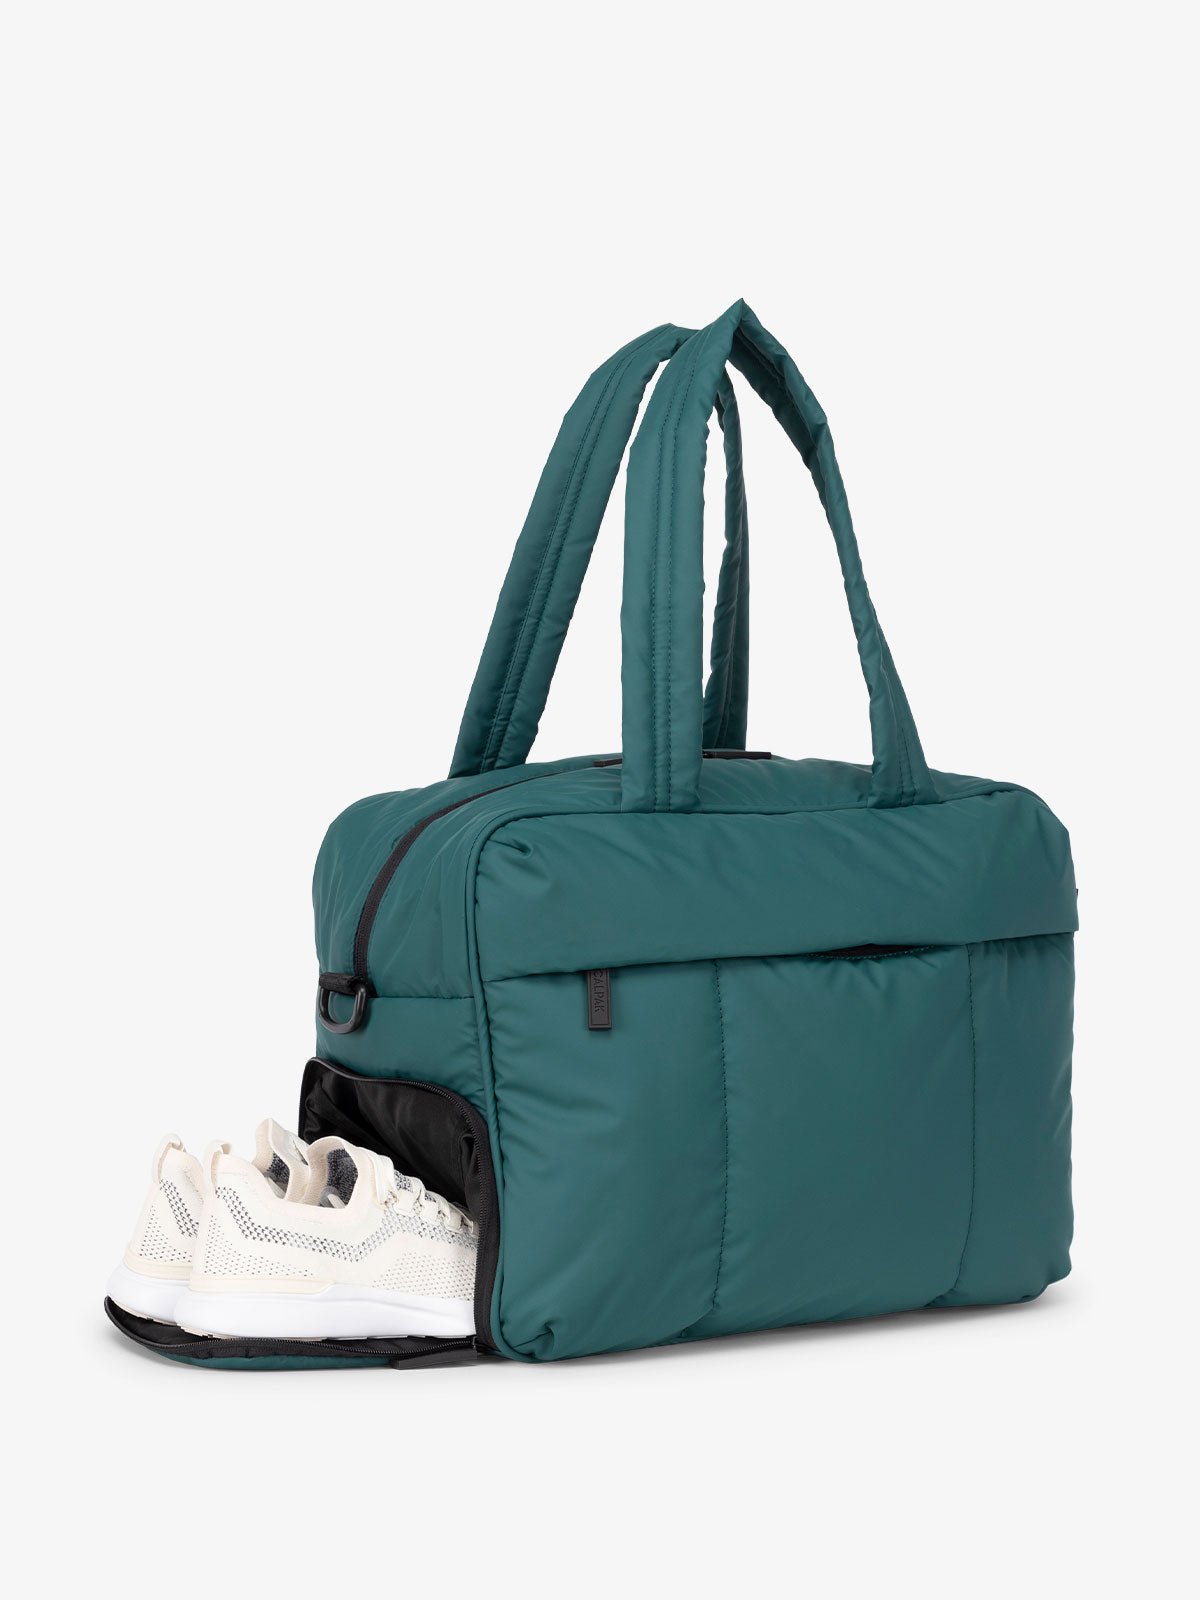 shoe compartment for Luka duffel bag in kale green